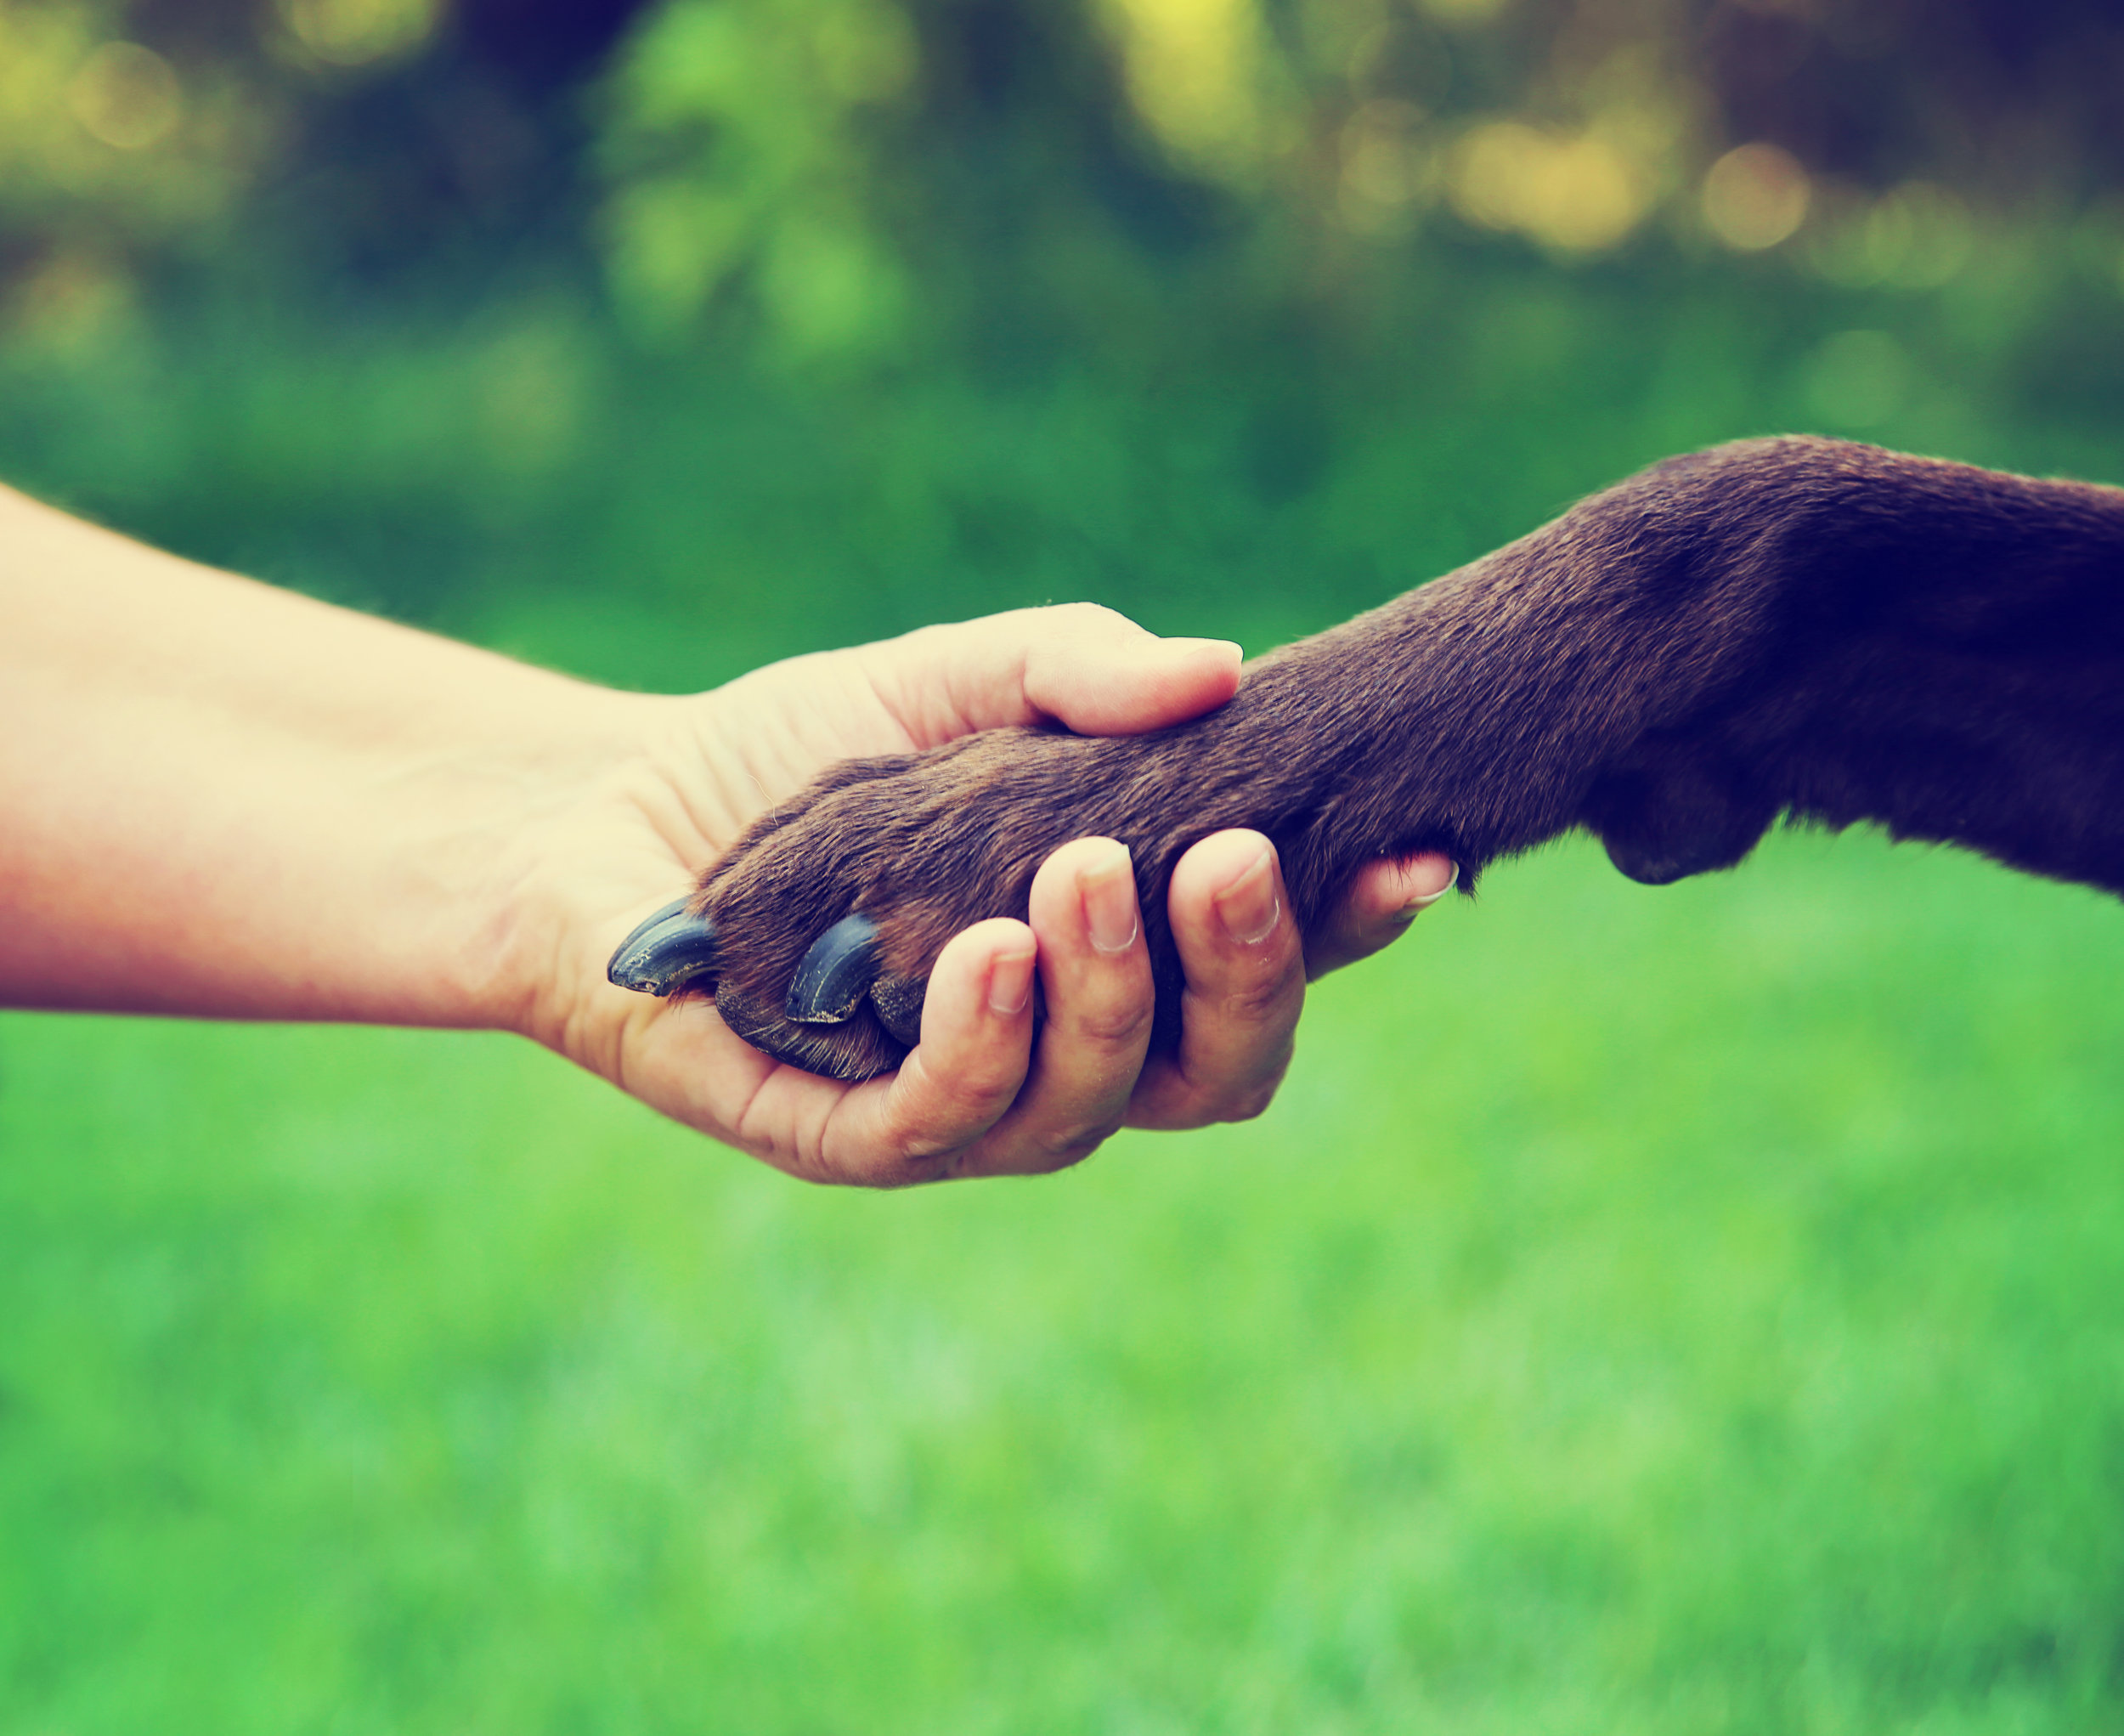  Strengthen the bond between you and your pet   Dog Training    Learn More  